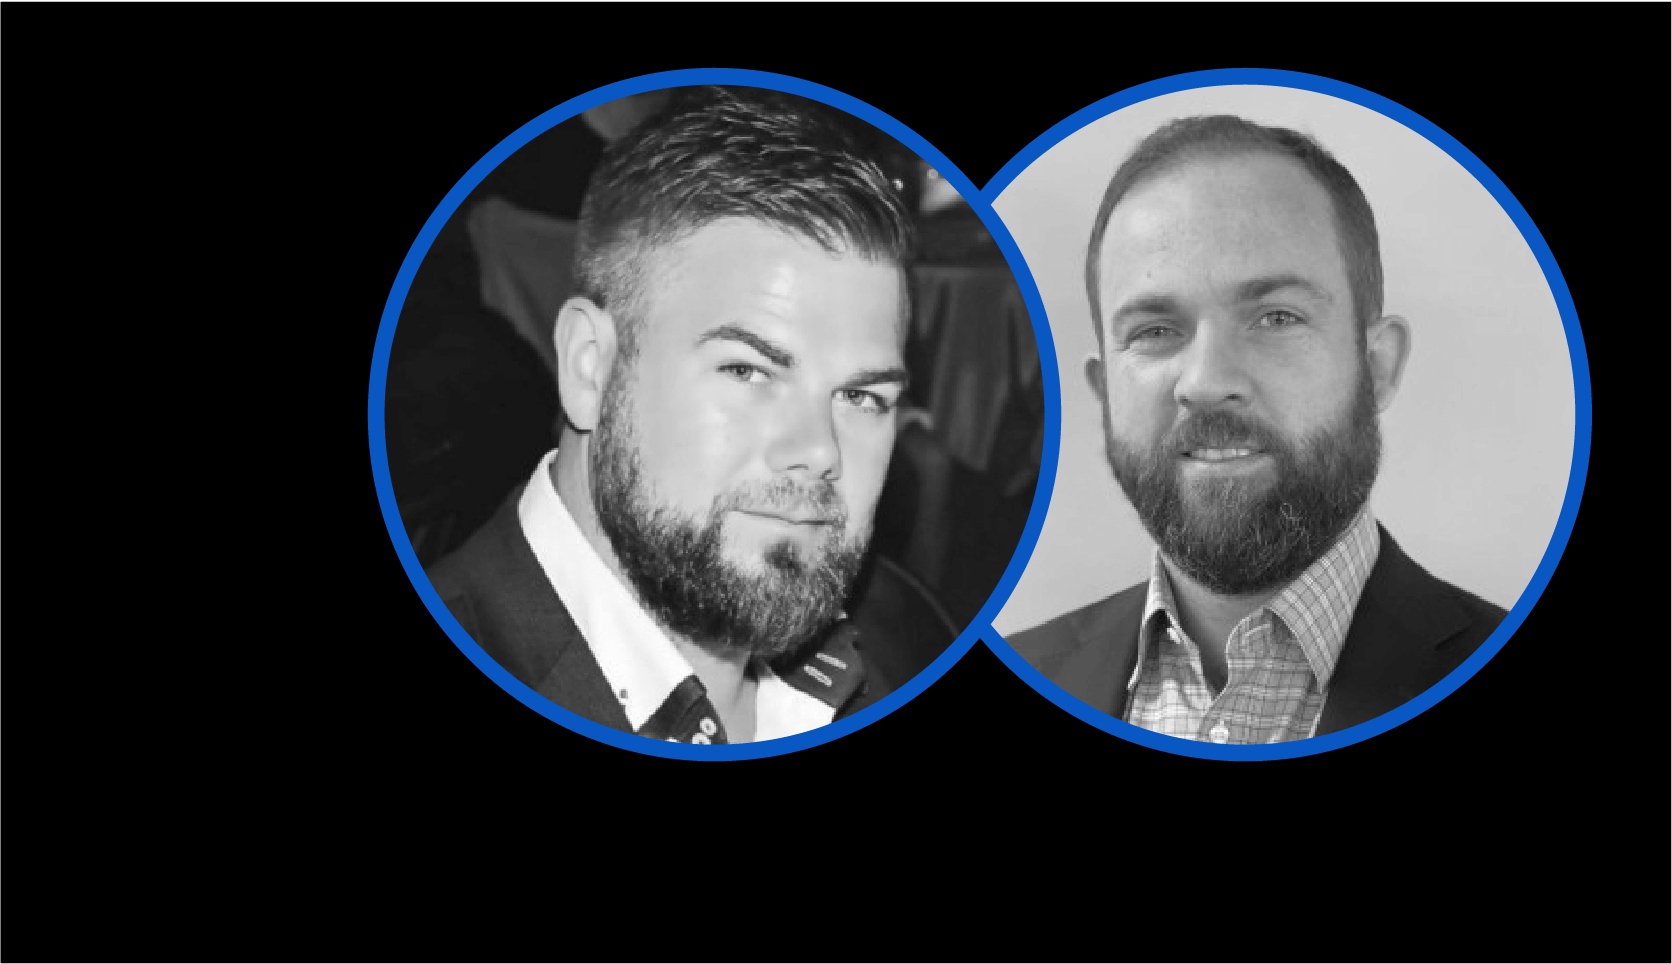 Cybersecurity in Australia with Adam Green and Dirk Hodgson